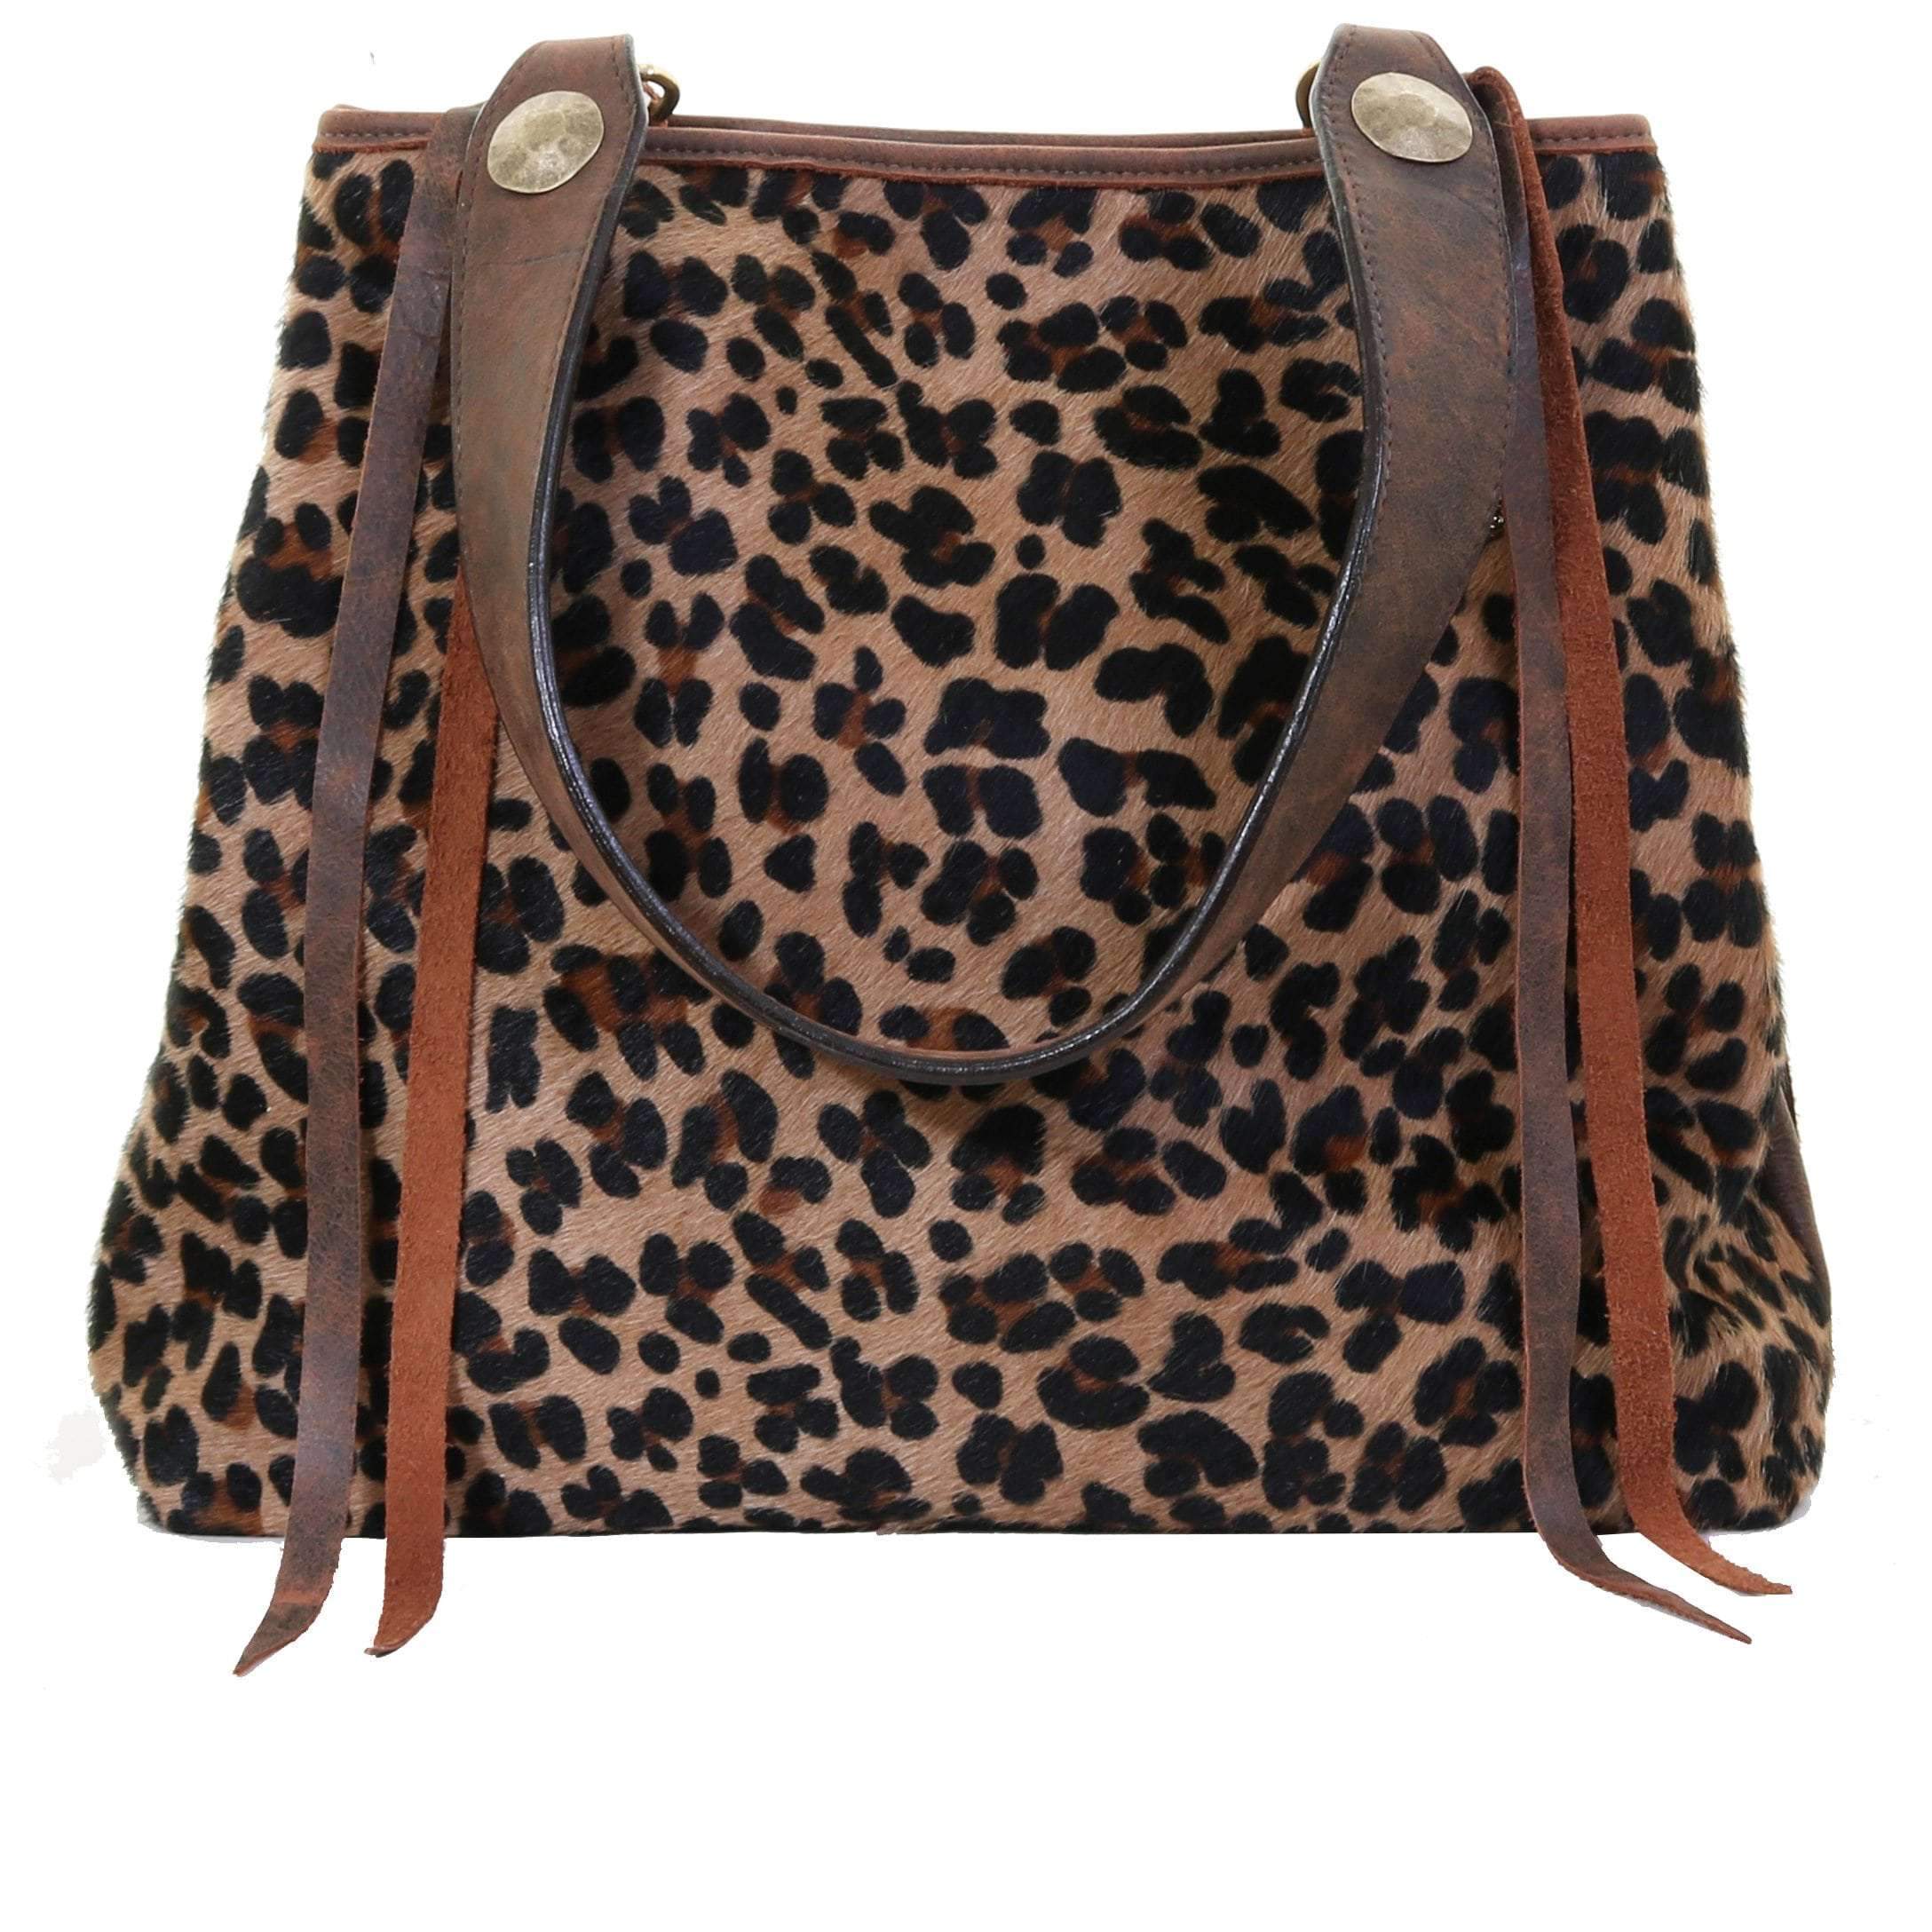 Double Sac Bretelle in Leopard, an all time fav we just brought